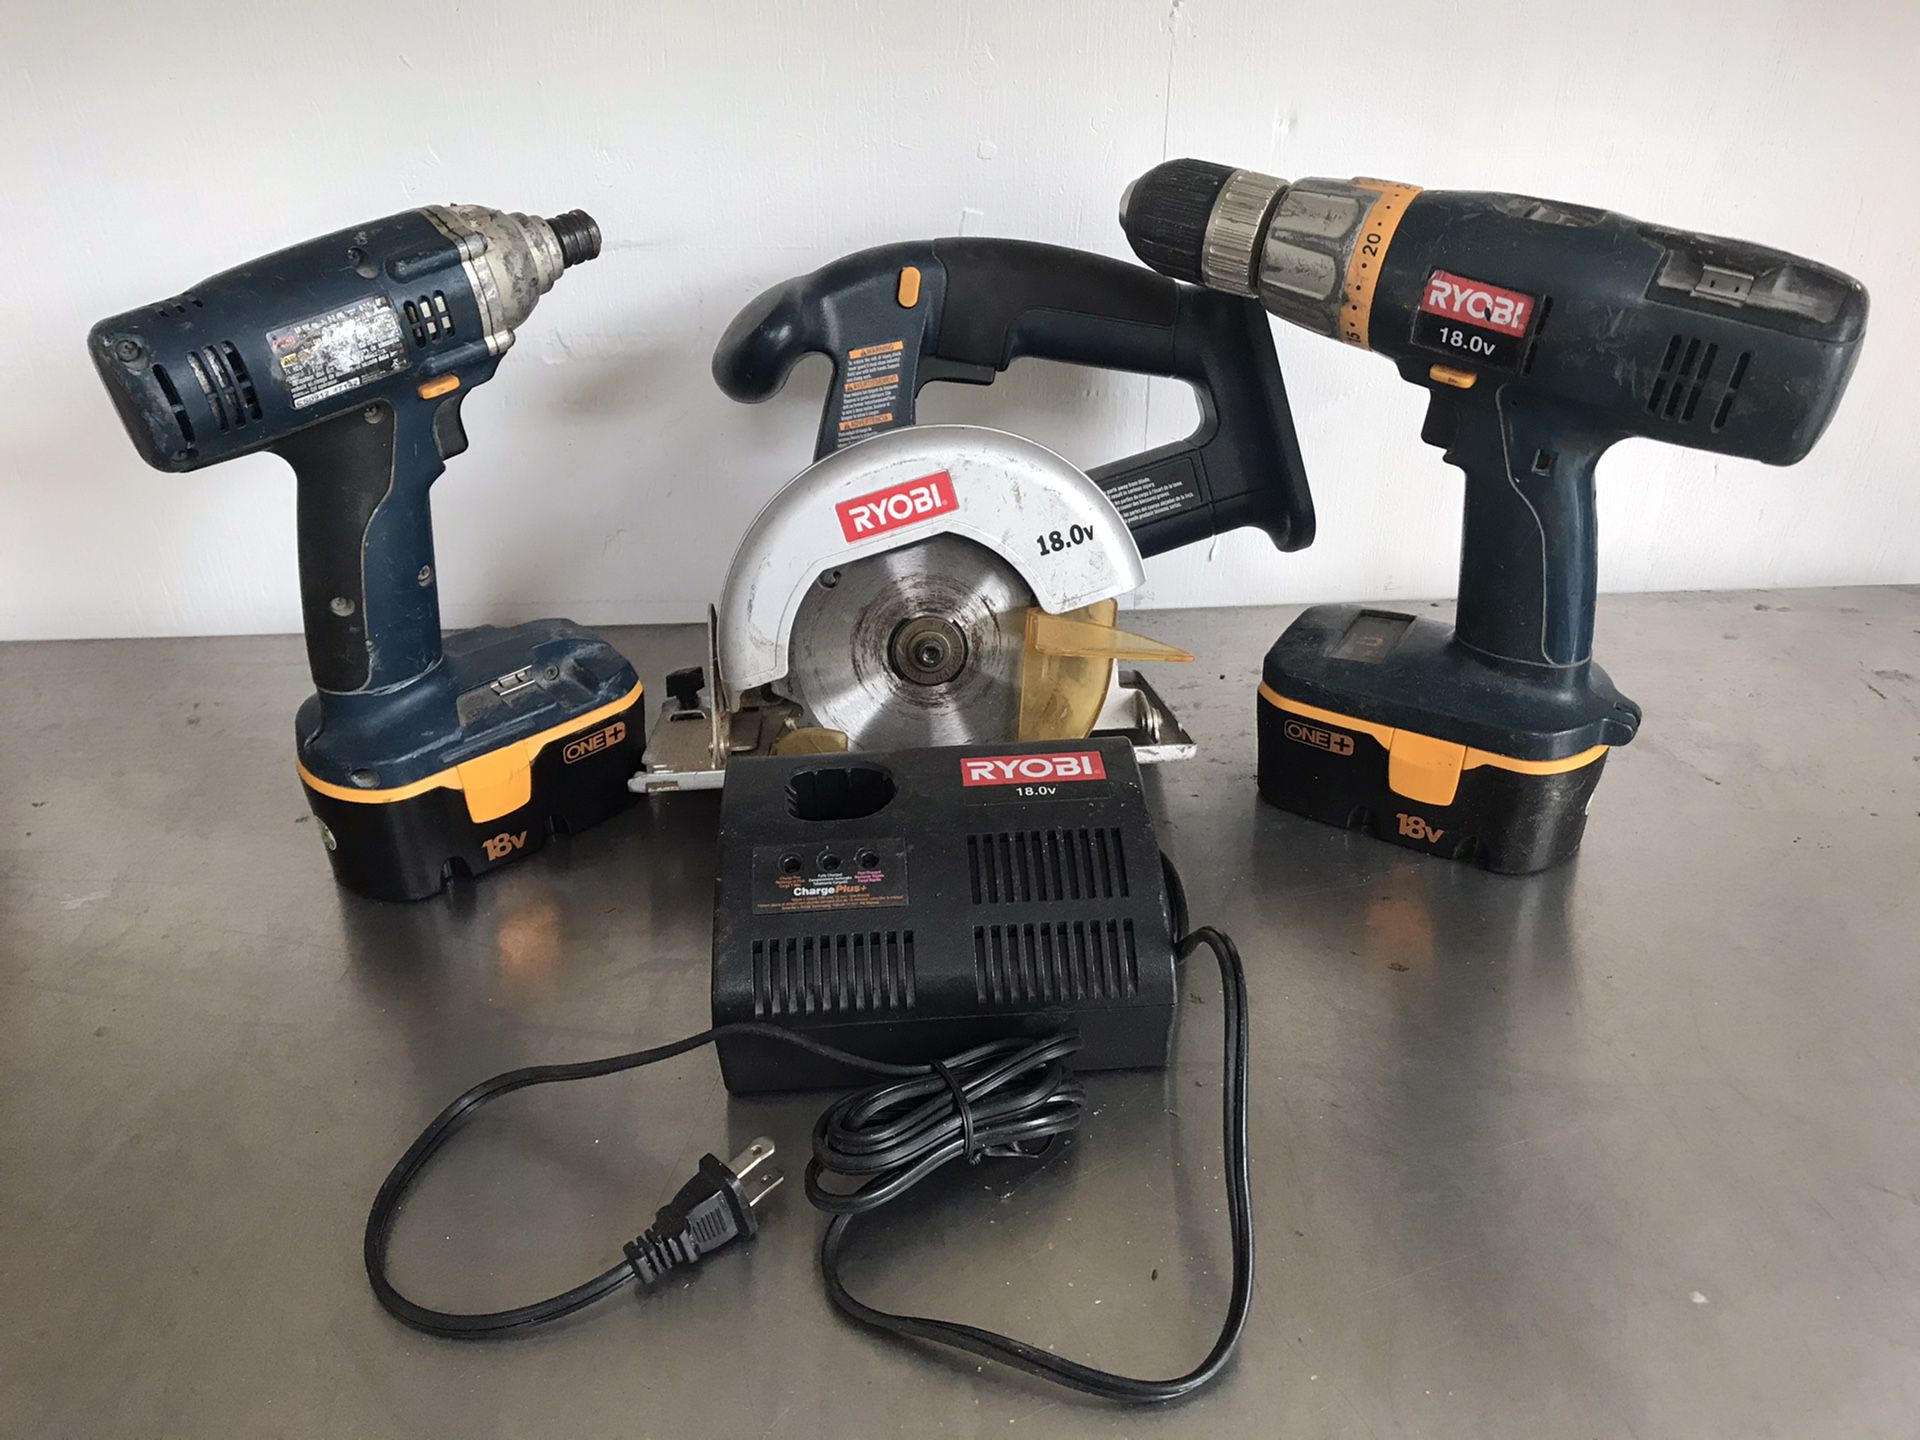 RYOBI 18-Volt ONE Nicad Cordless 3-Tool Combo Kit with 2 Batteries and Charger